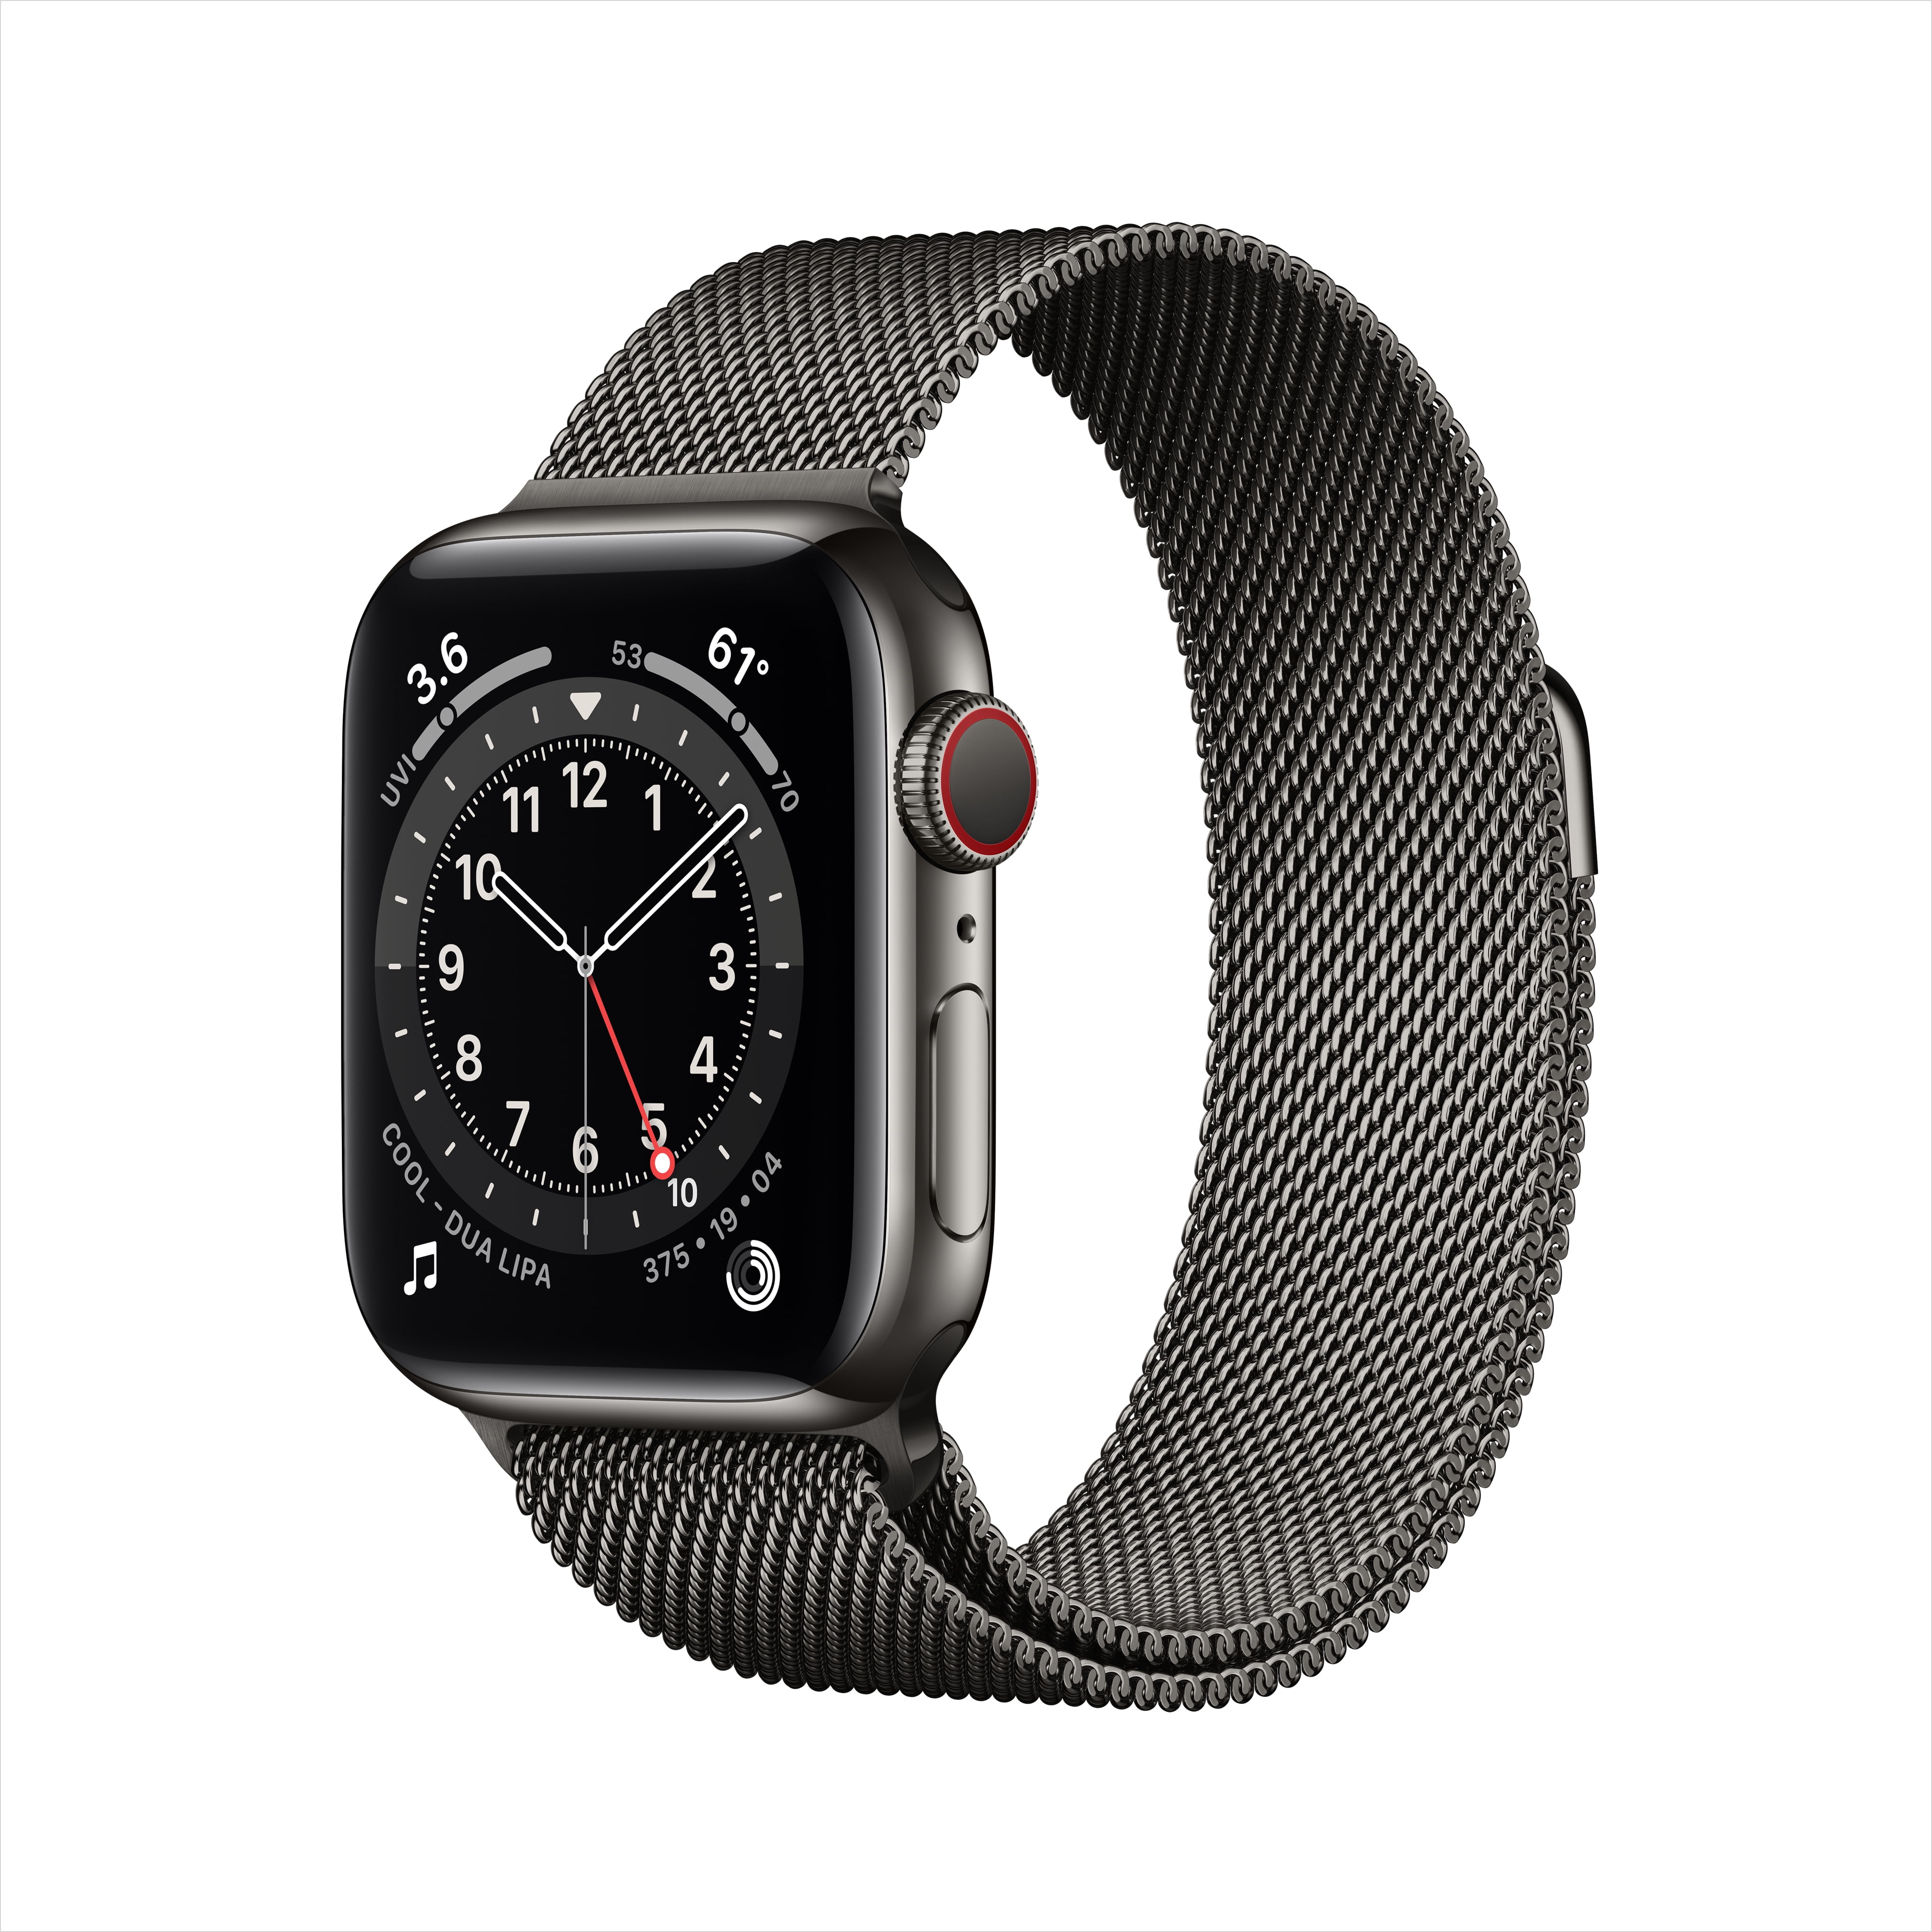 Apple Watch Series 6 GPS + Cellular, 40mm Graphite Stainless Steel